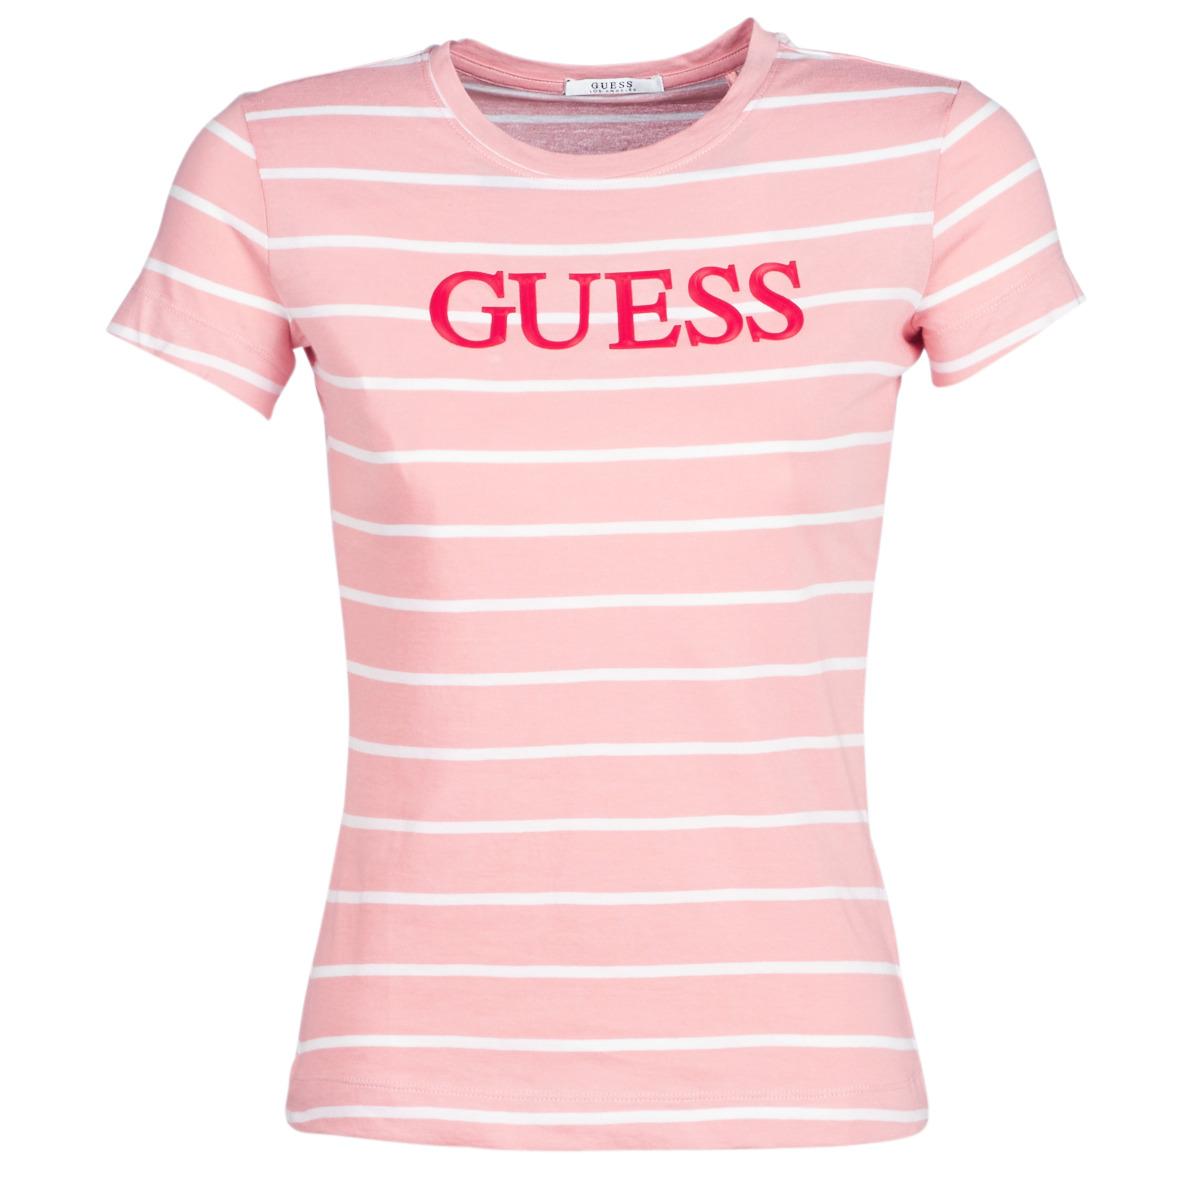 Guess Stripe T Shirt in Pink - Lyst